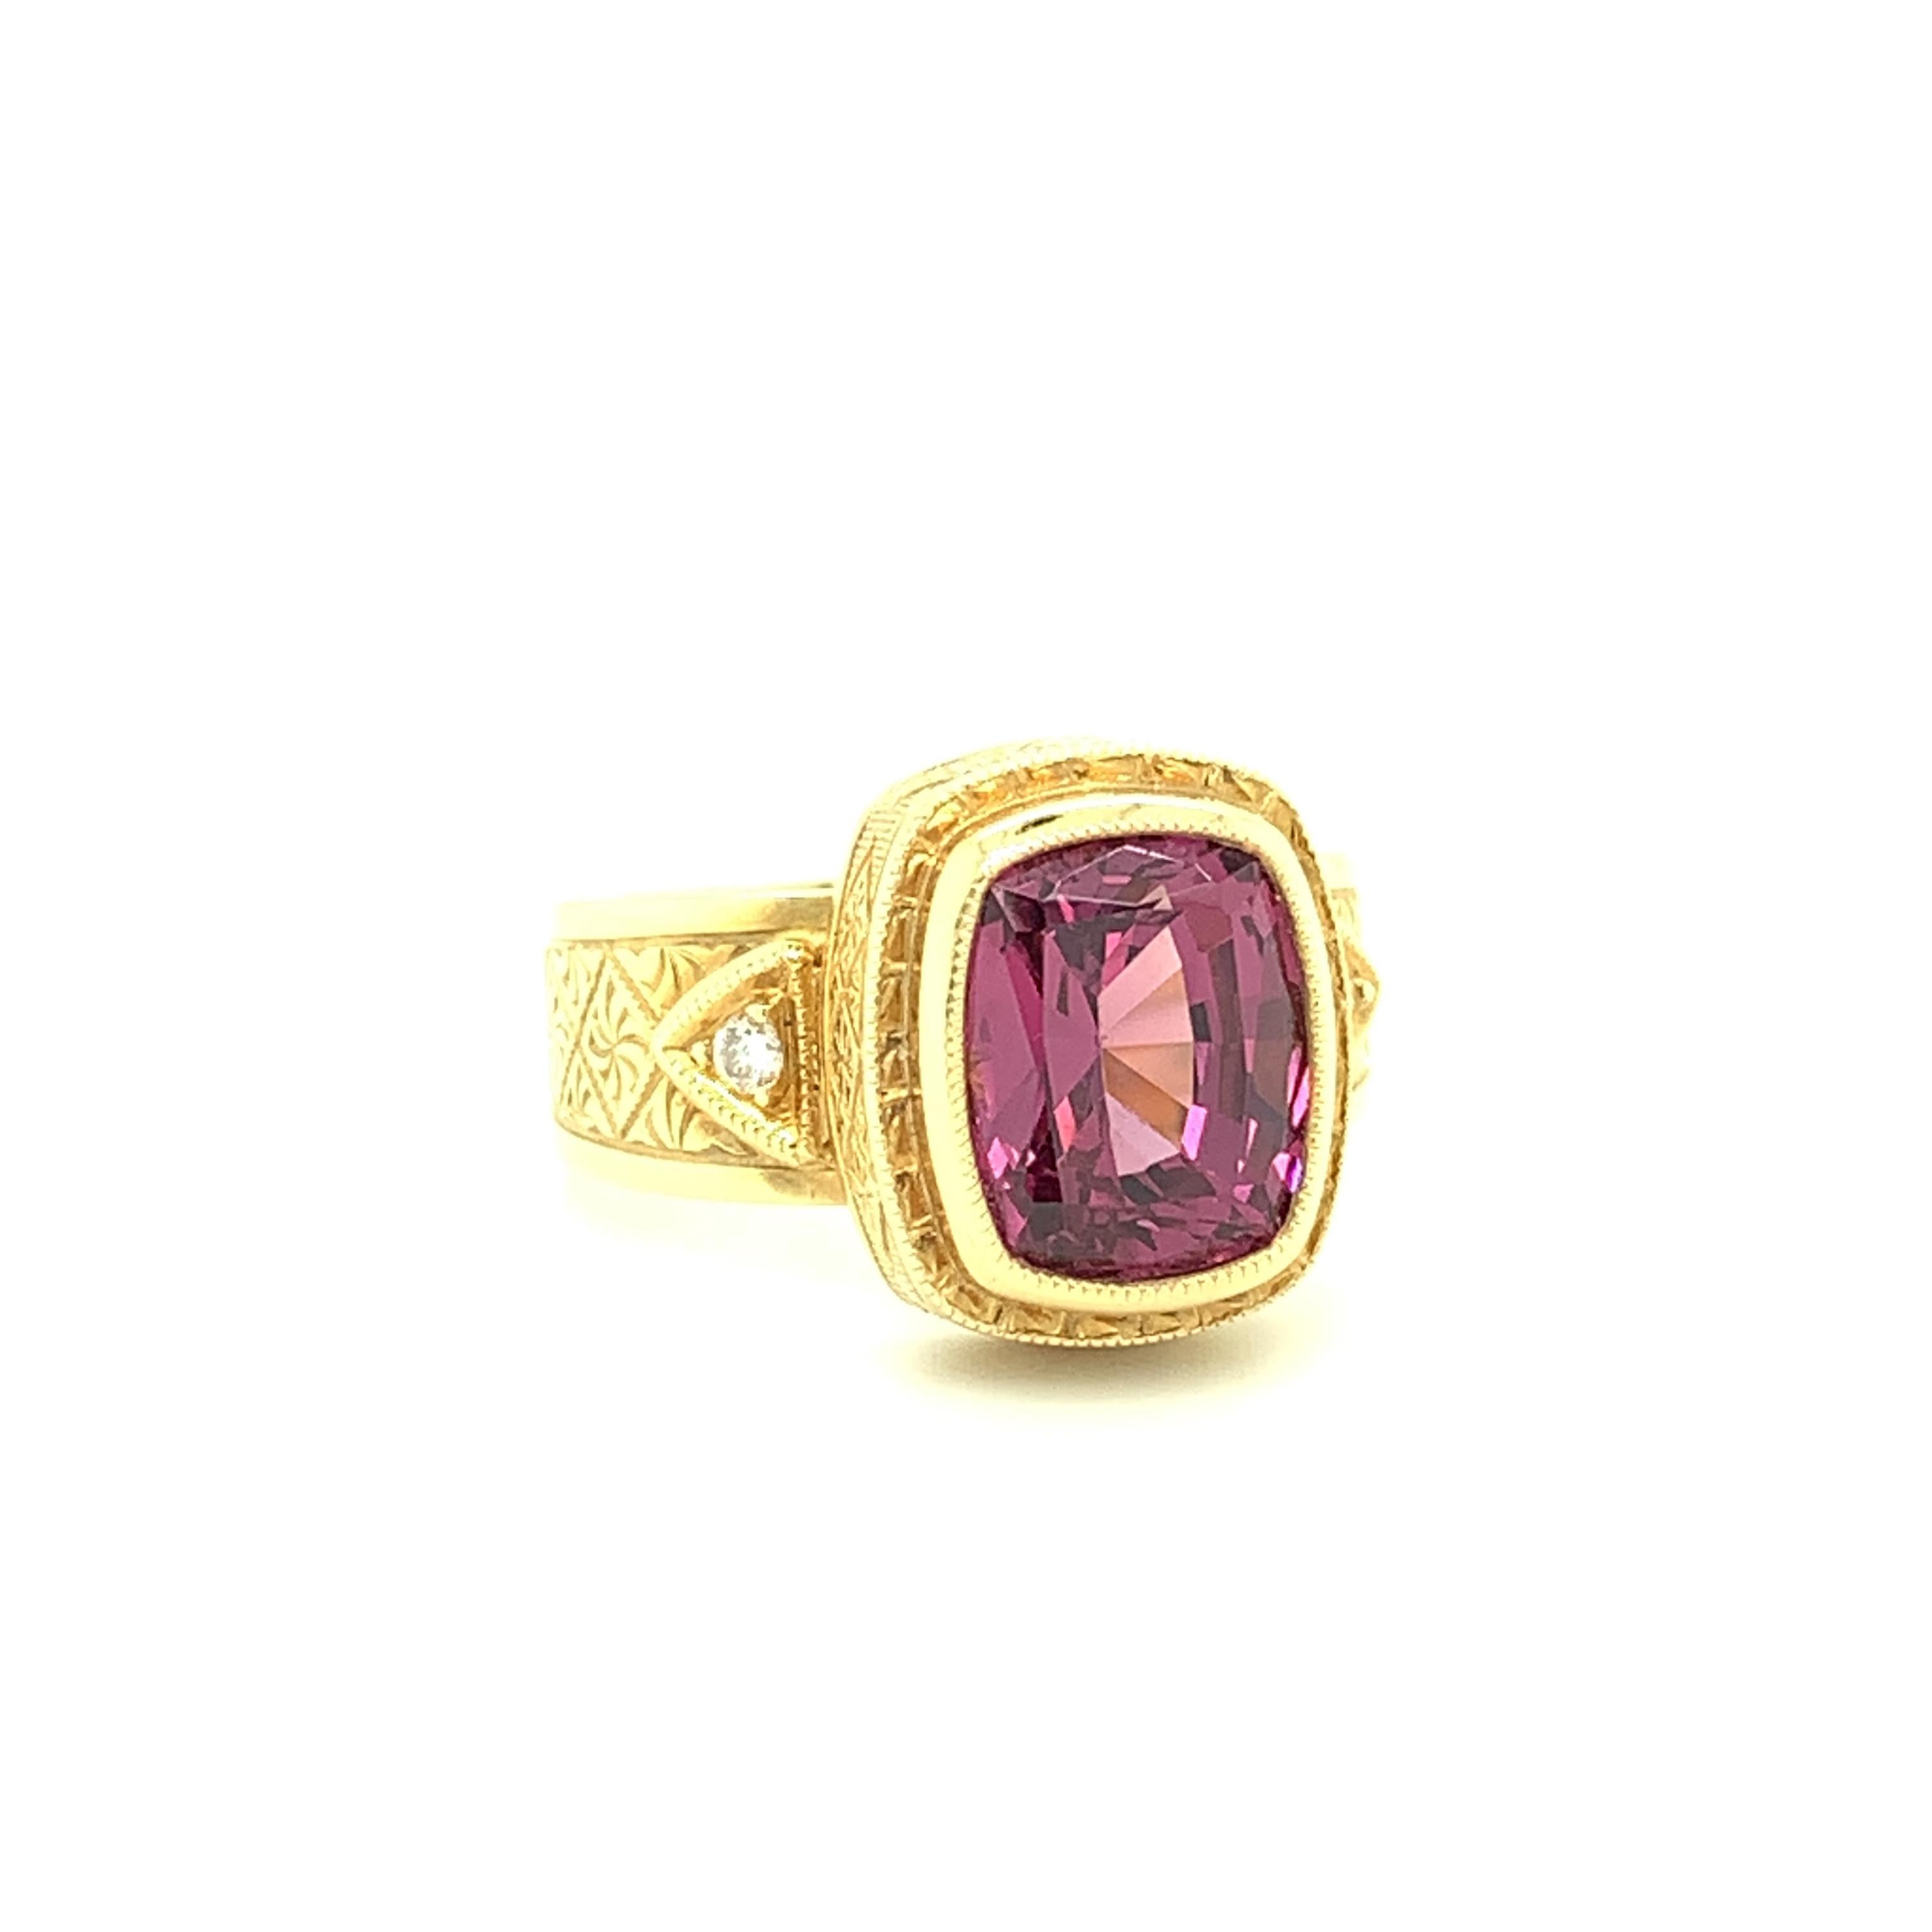 4.30 Carat Rhodolite Garnet and Diamond Band Ring in 18k Yellow Gold   For Sale 1